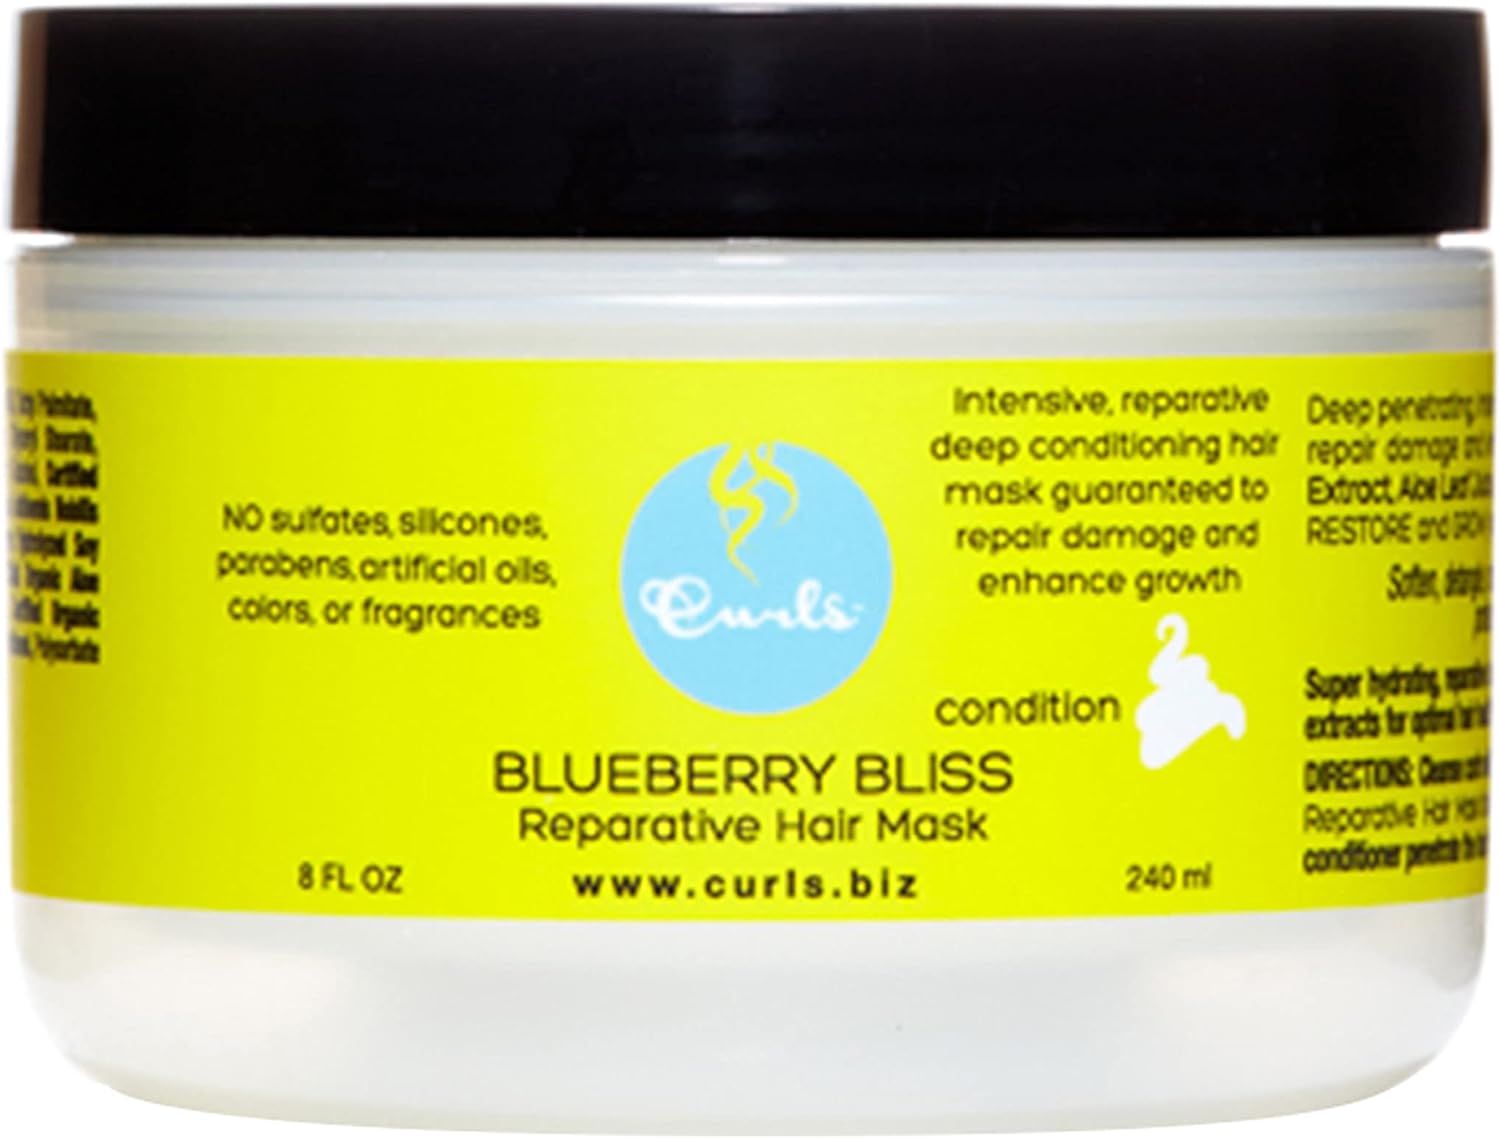 Curls Blueberry Bliss Reparative Hair Mask - Deep Conditioning - Repair, Protect, Restore, and Grow Your Hair